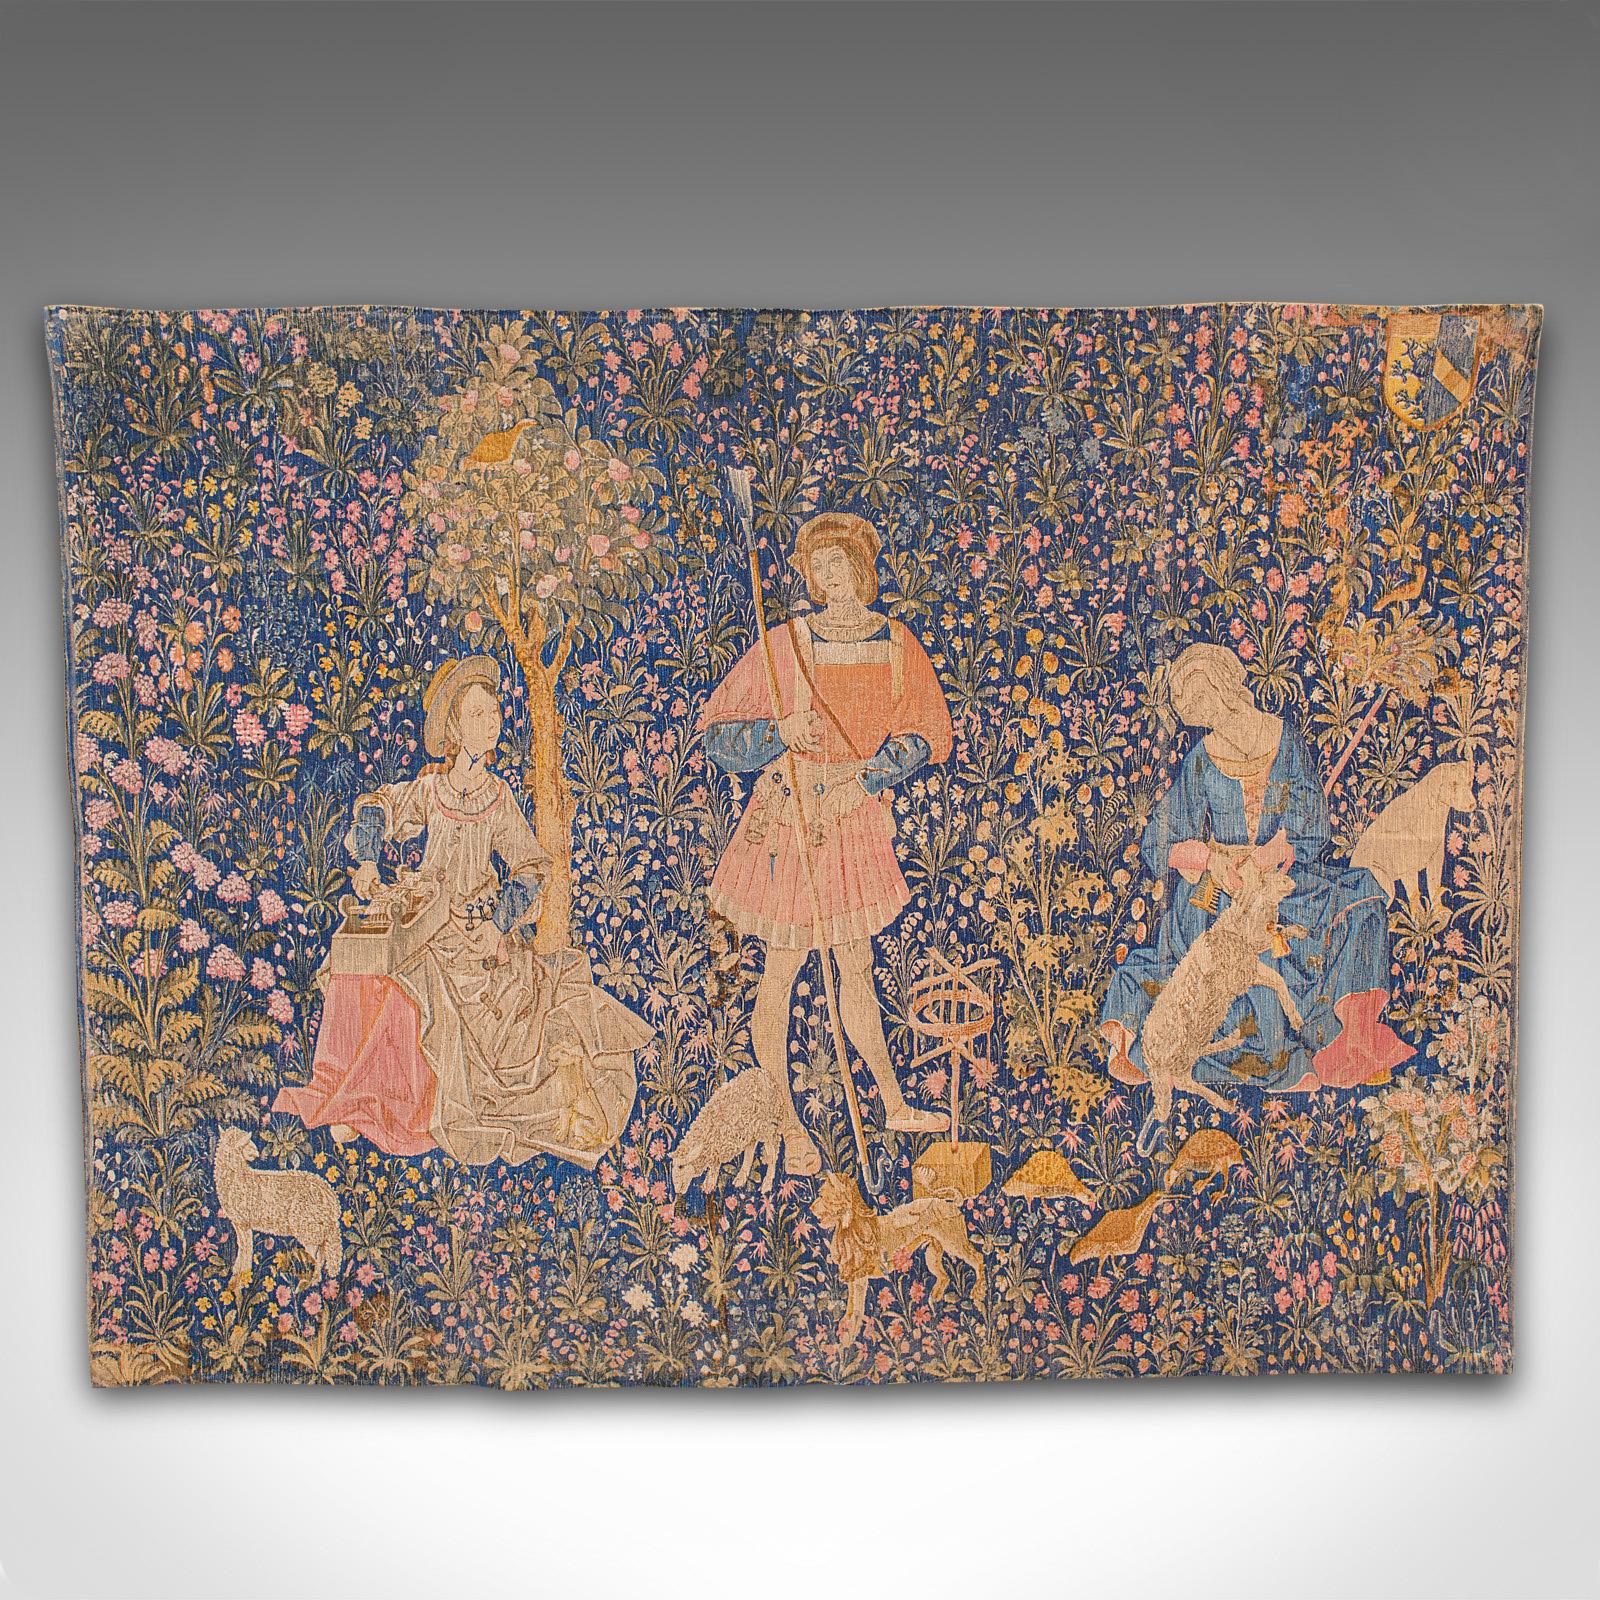 This is a large antique tapestry. A French, needlepoint decorative wall covering depicting wool workers in the Loire valley, dating to the early 20th century, circa 1920.

Of superior proportion, this tapestry is a quality recreation of a 16th